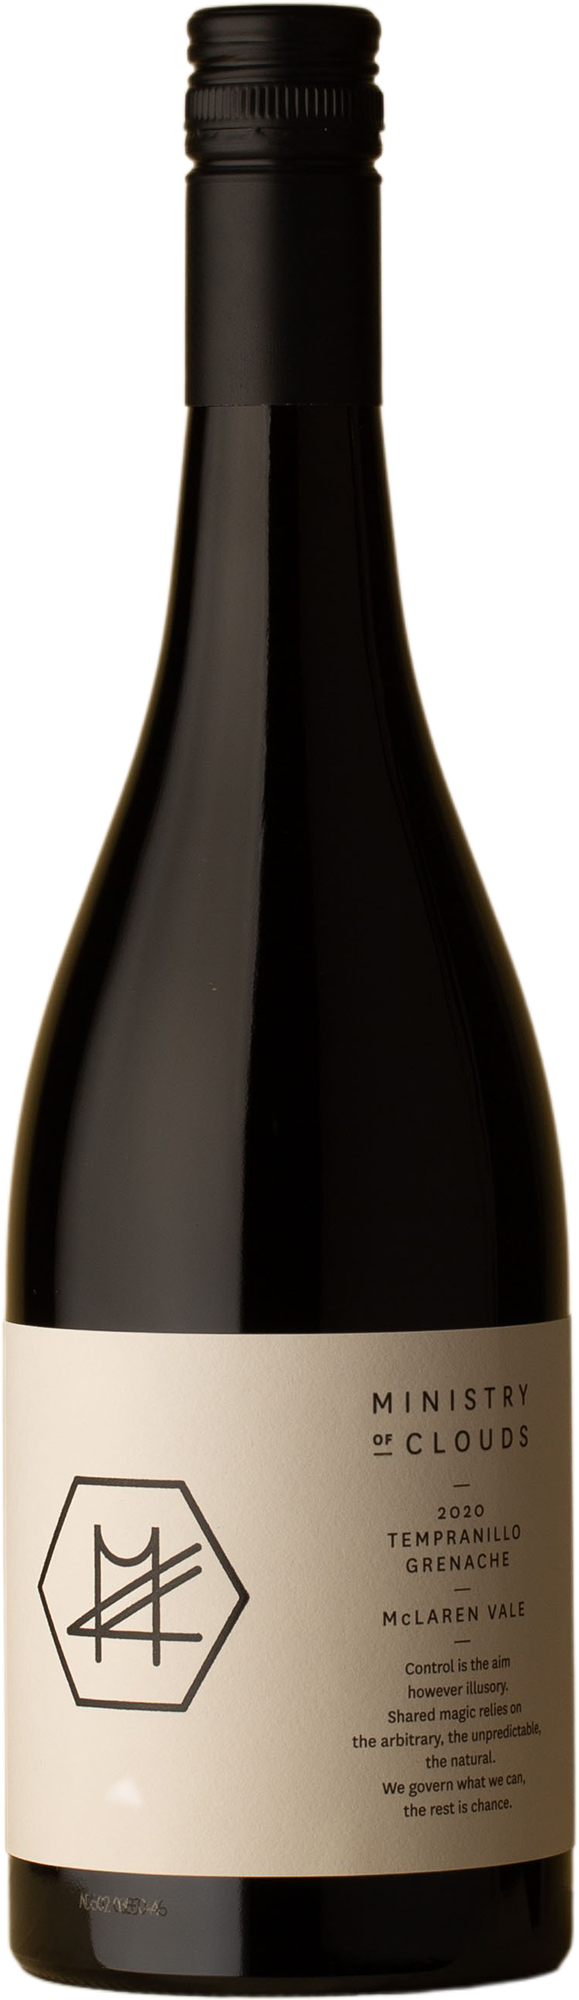 Ministry of Clouds - Tempranillo / Grenache 2020 Red Wine